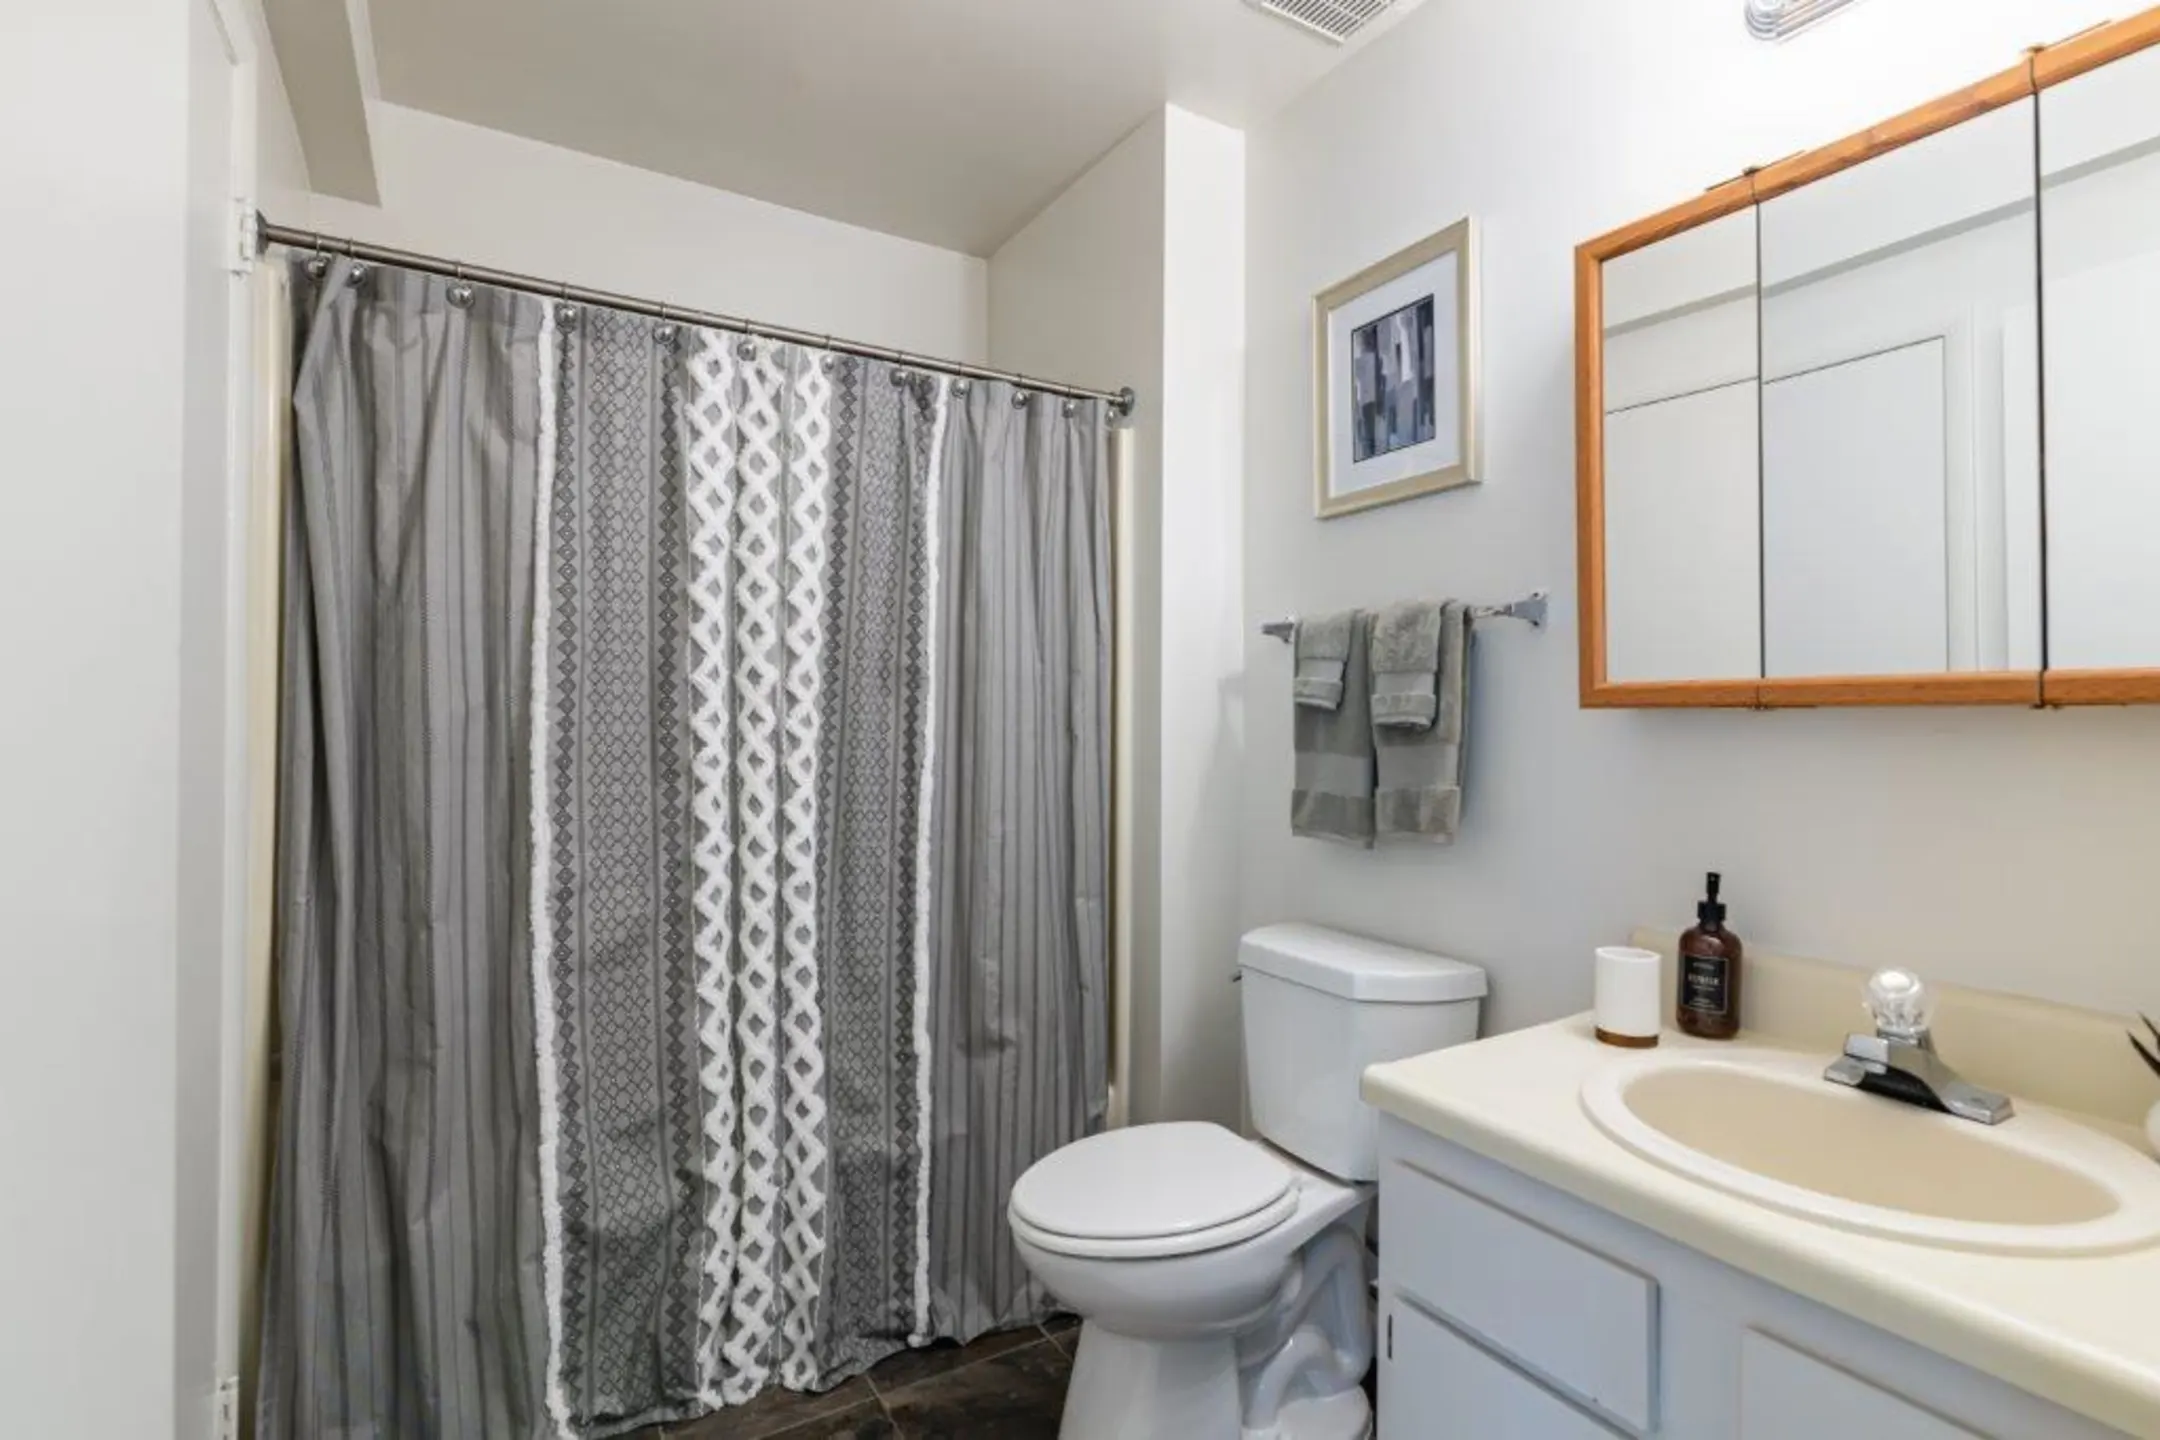 Bathroom - The Landings Apartment Homes - Absecon, NJ